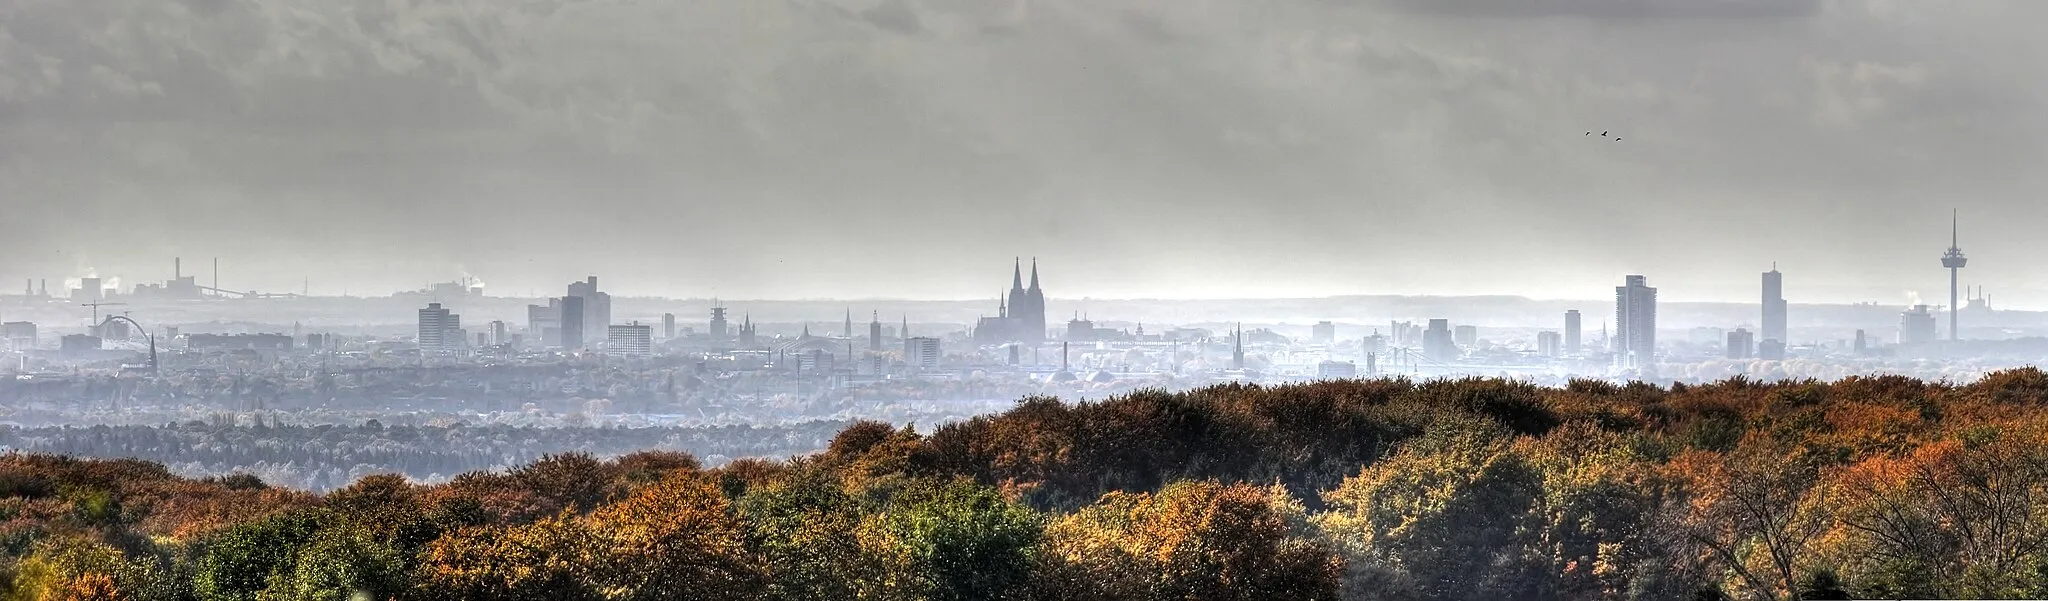 Photo showing: Skyline of Cologne, Germany on a rainy day. Taken from a hill in Voiswinkel